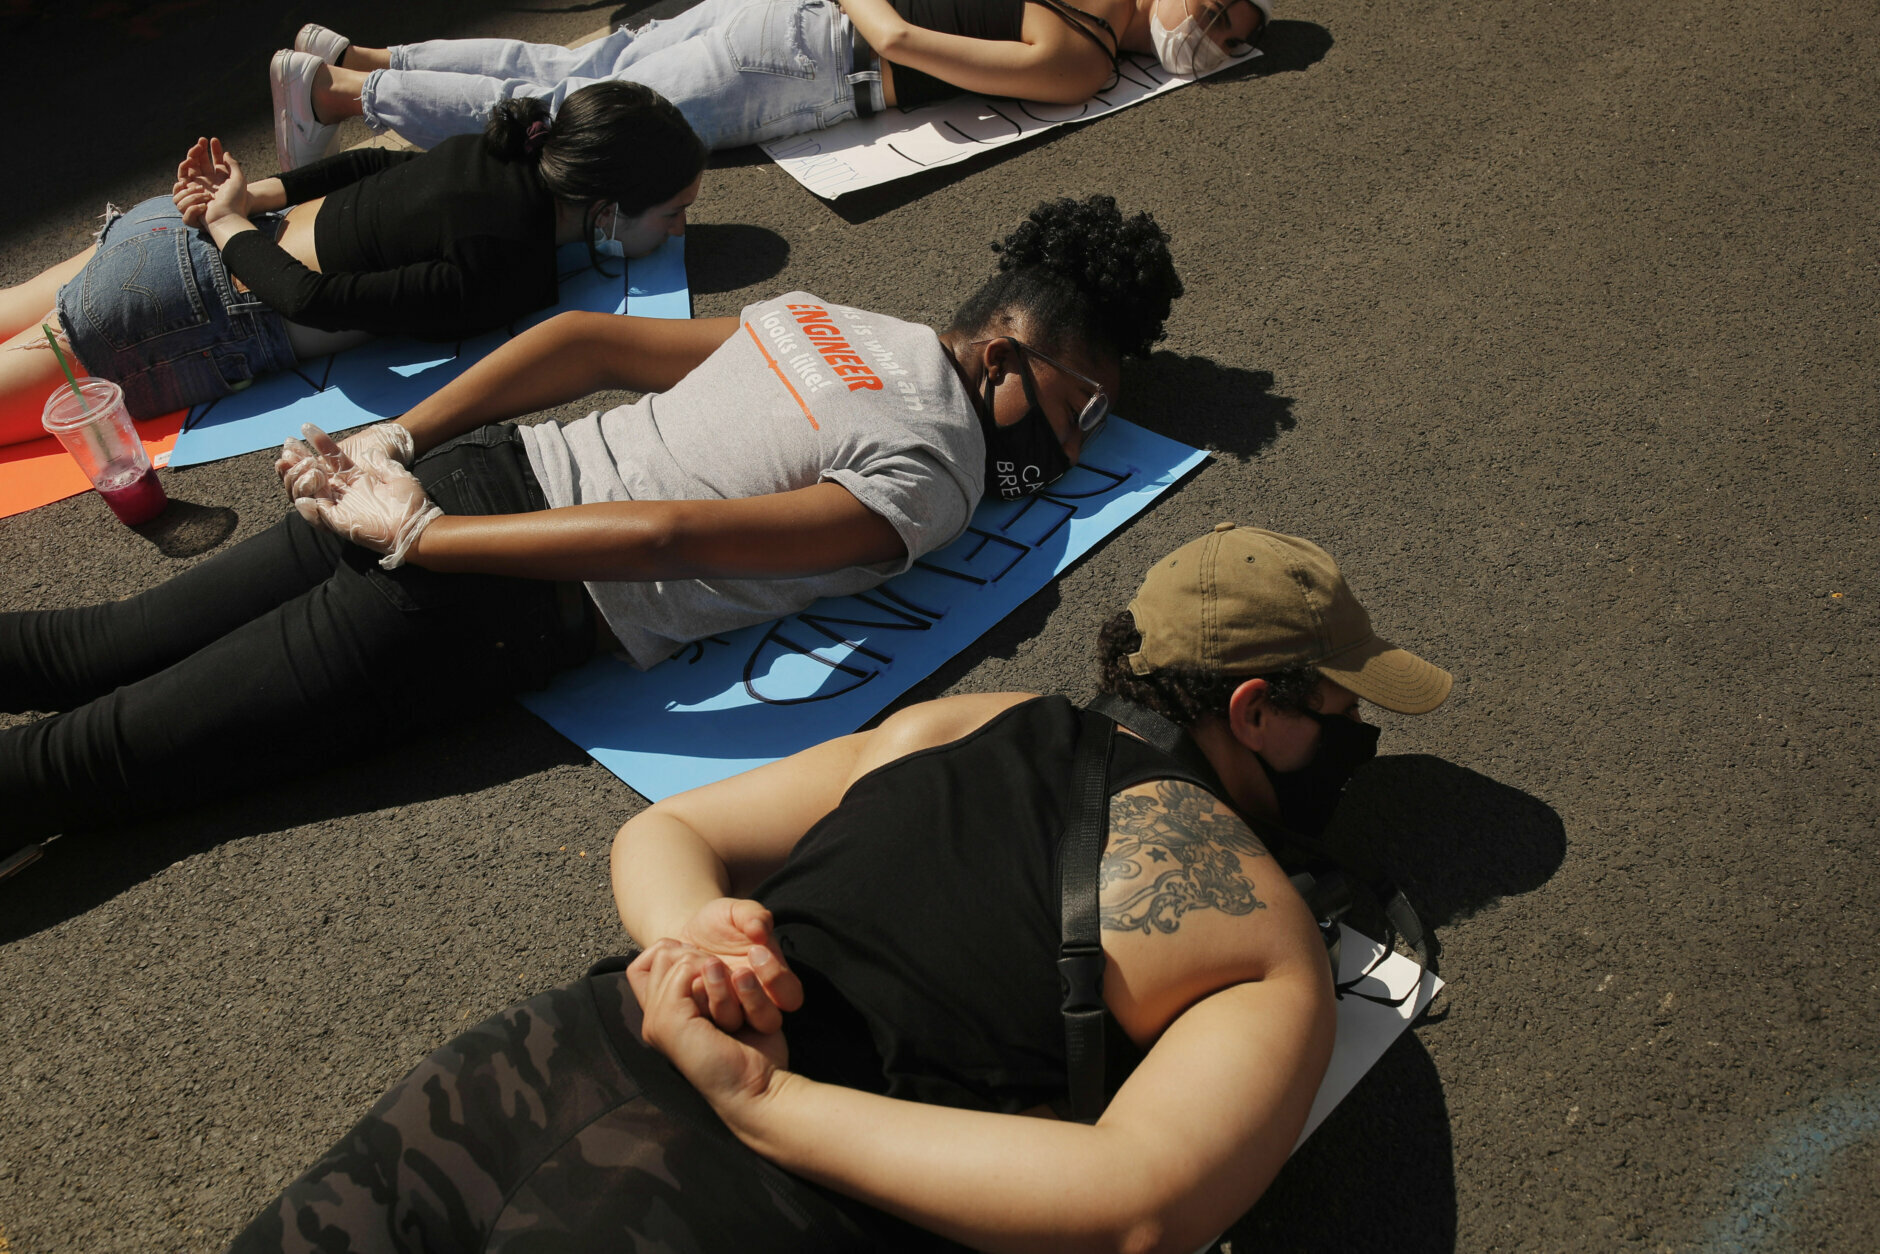 Women lie prone on the street with hundreds of others for 8 minutes and 46 seconds--the amount of time Minneapolis police restrained George Floyd--at a protest Sunday, June 7, 2020, near the White House in Washington over the death of George Floyd, who died May 25 after being restrained by police in Minneapolis. (AP Photo/Maya Alleruzzo)